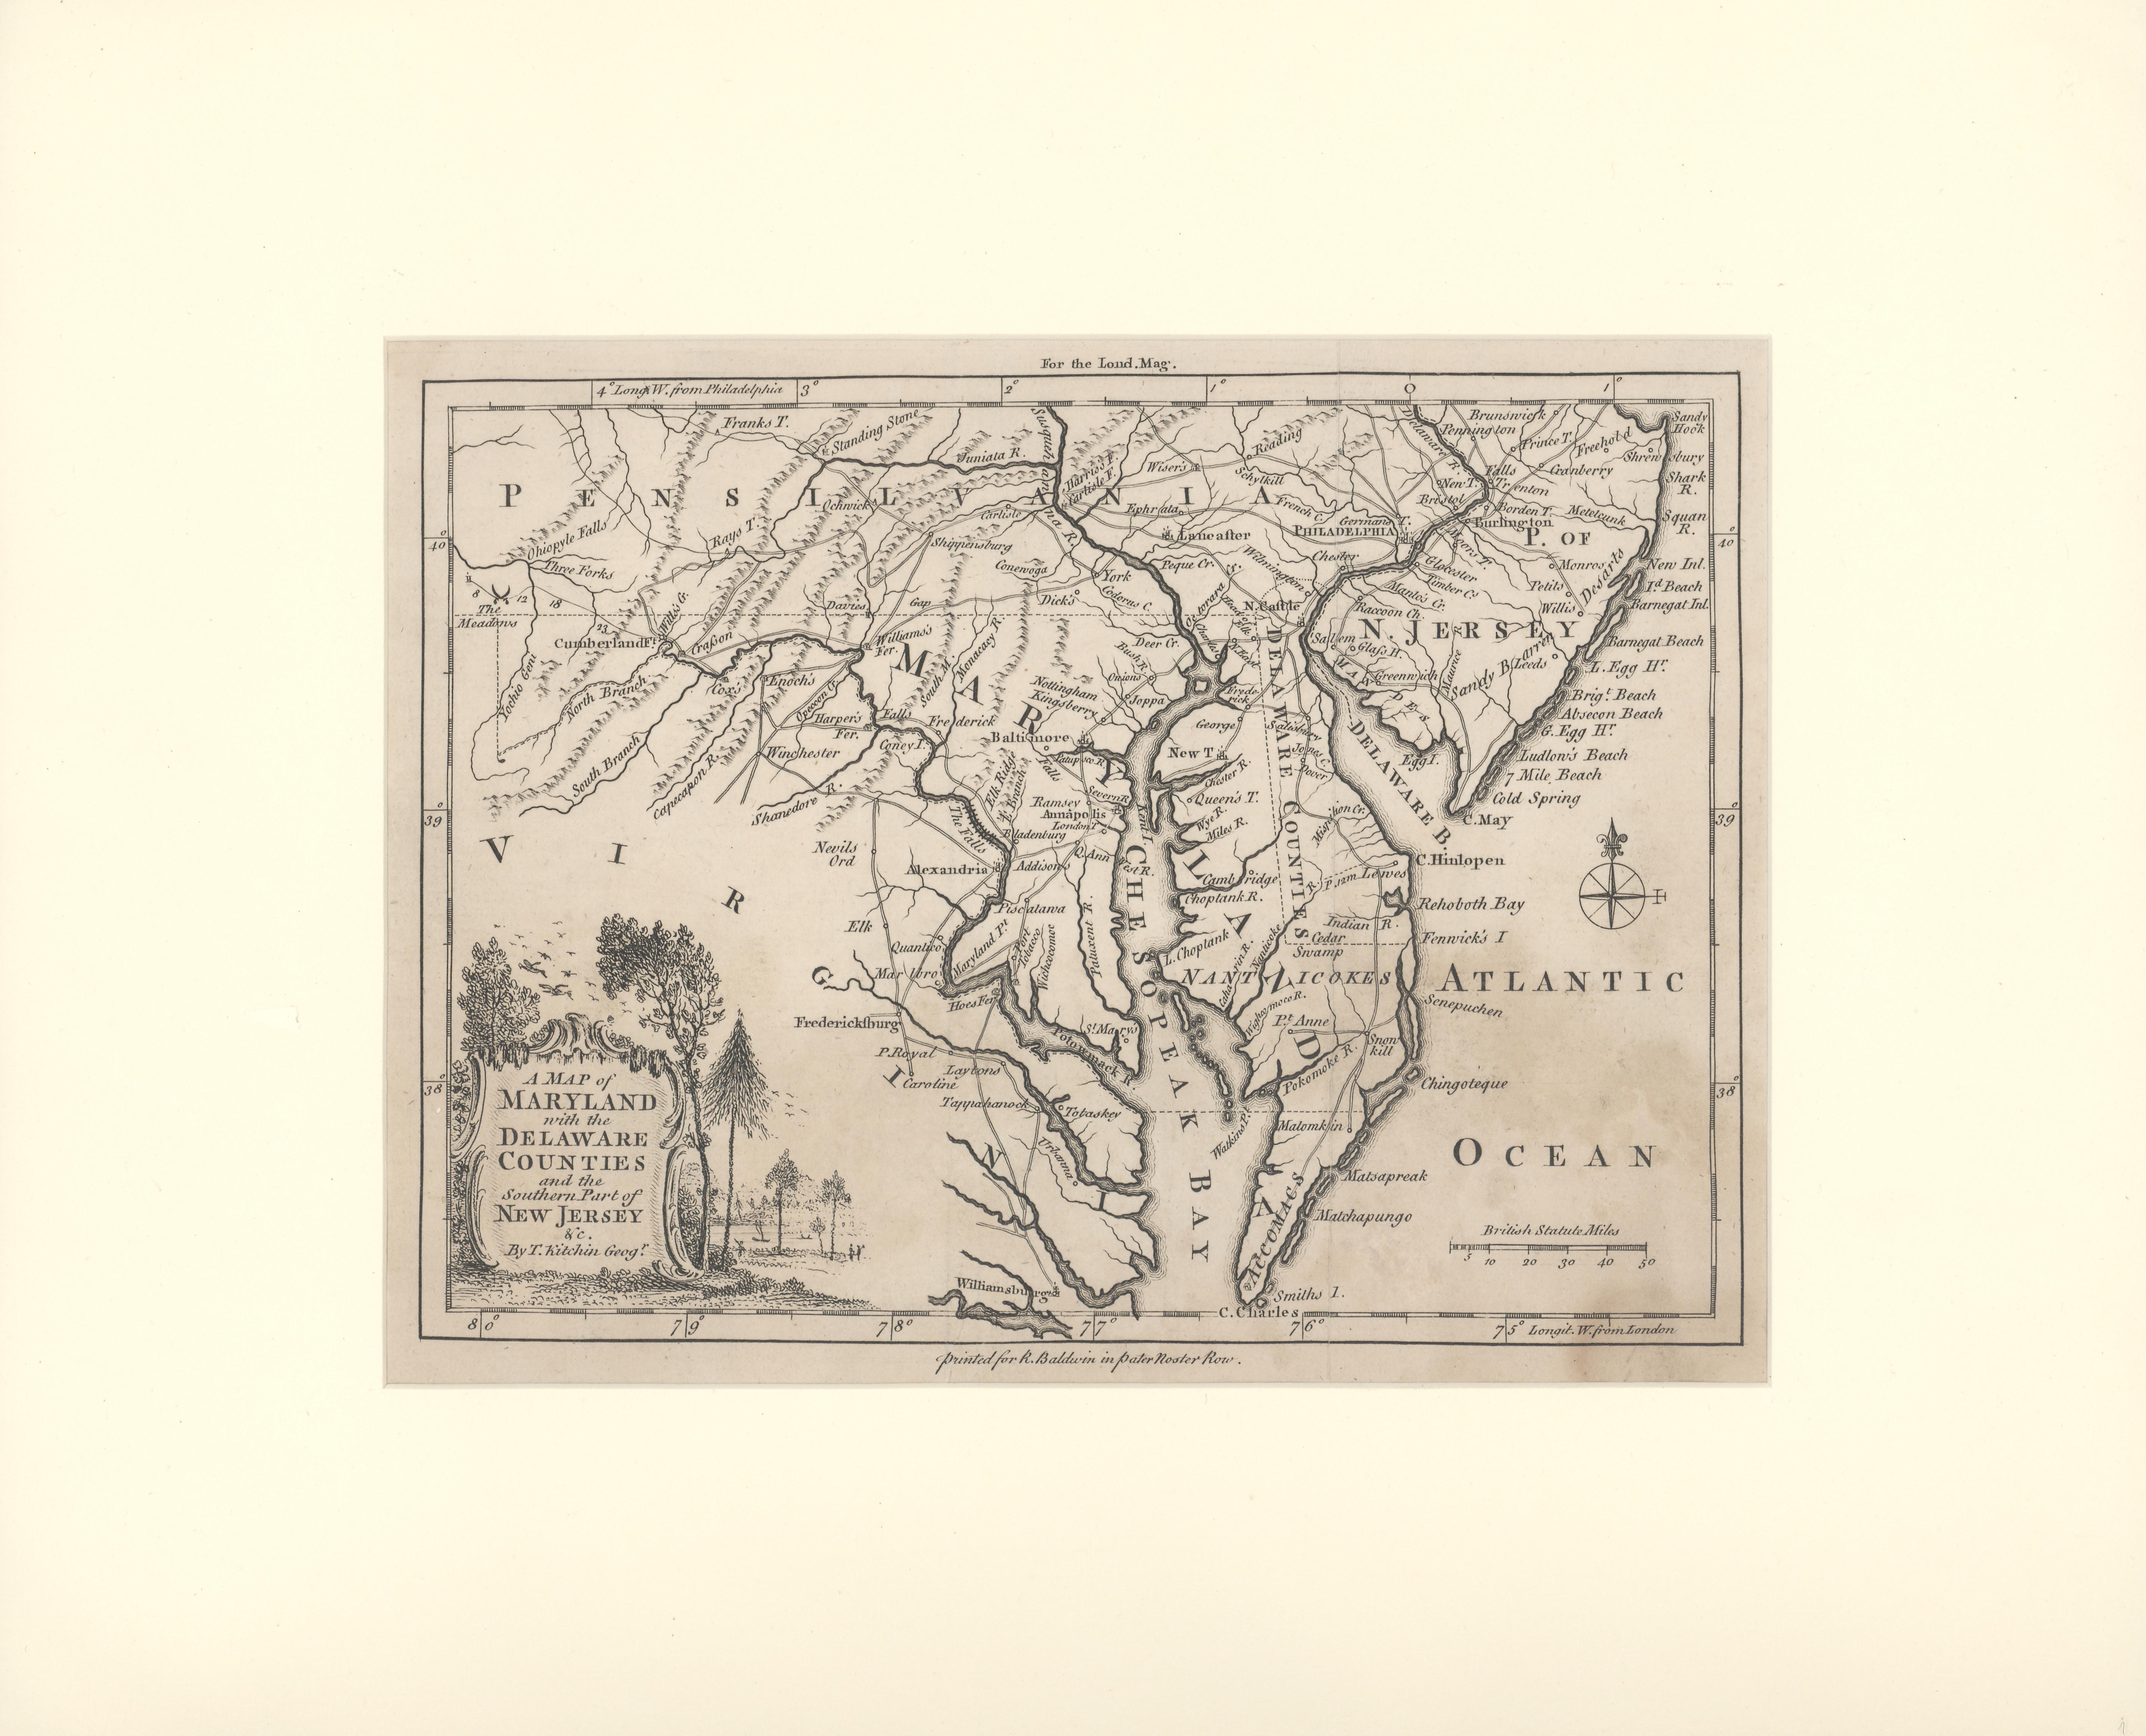 Thomas Kitchin Landscape Print - 1757 Map of Maryland, Delaware Counties and the Southern part of New Jersey